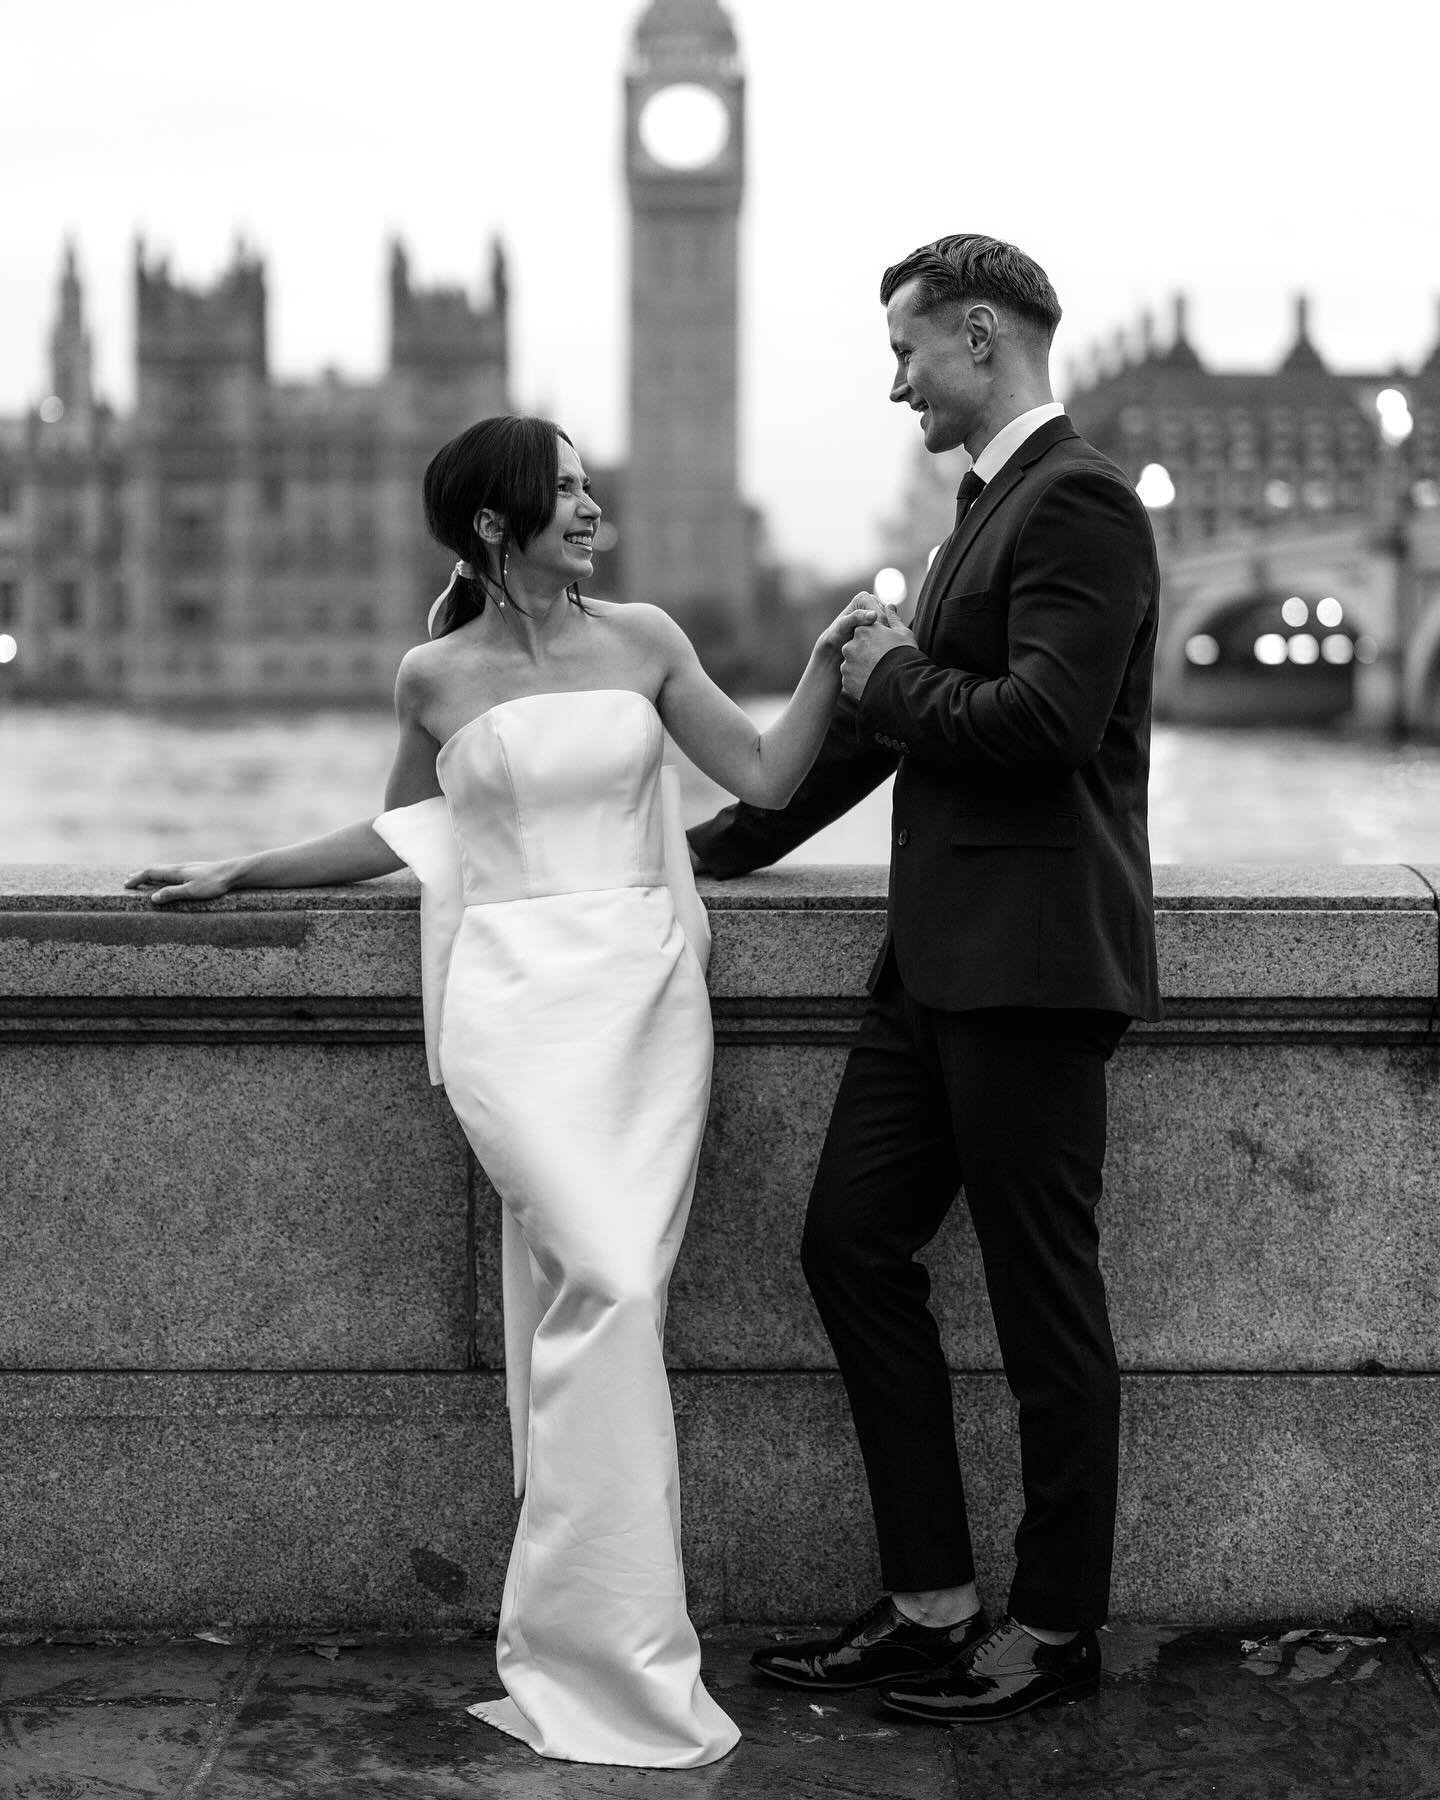 Imagine this, you&rsquo;re a couple, deeply in love, seeking an intimate elopement amidst the London&rsquo;s skyline. 

Beautiful Westminster Bridge 🤍

Models- @mrs.dravniece @dravs.t 
Hair- @glow_occasionhair 
MUA- @emilychantal_mua 
Dress- @bae.sp